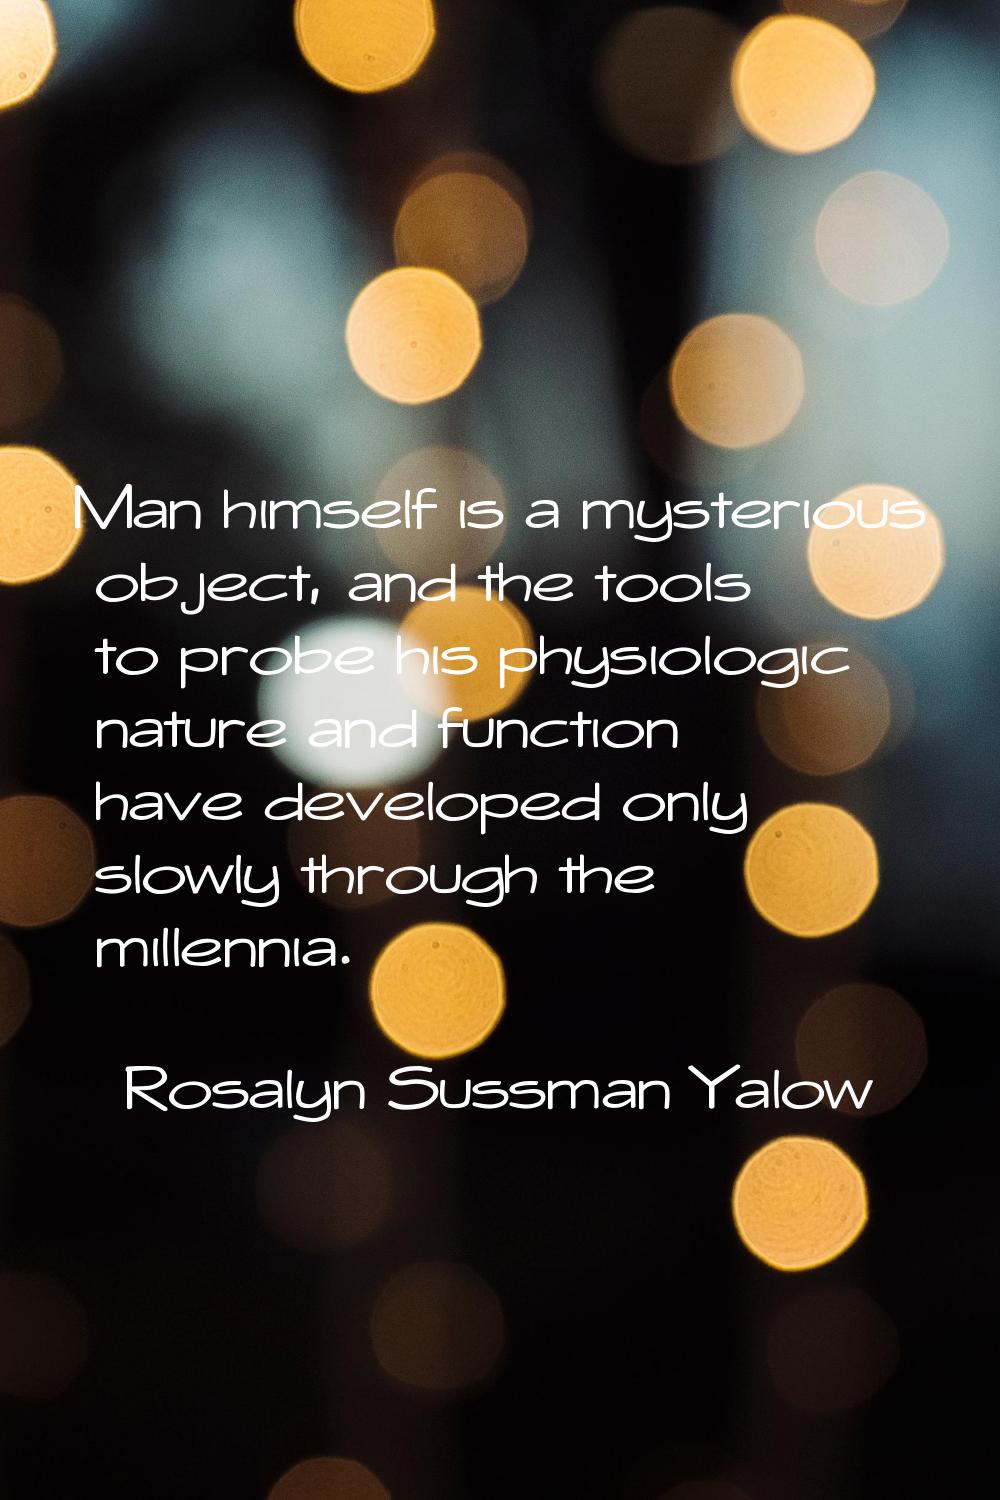 Man himself is a mysterious object, and the tools to probe his physiologic nature and function have